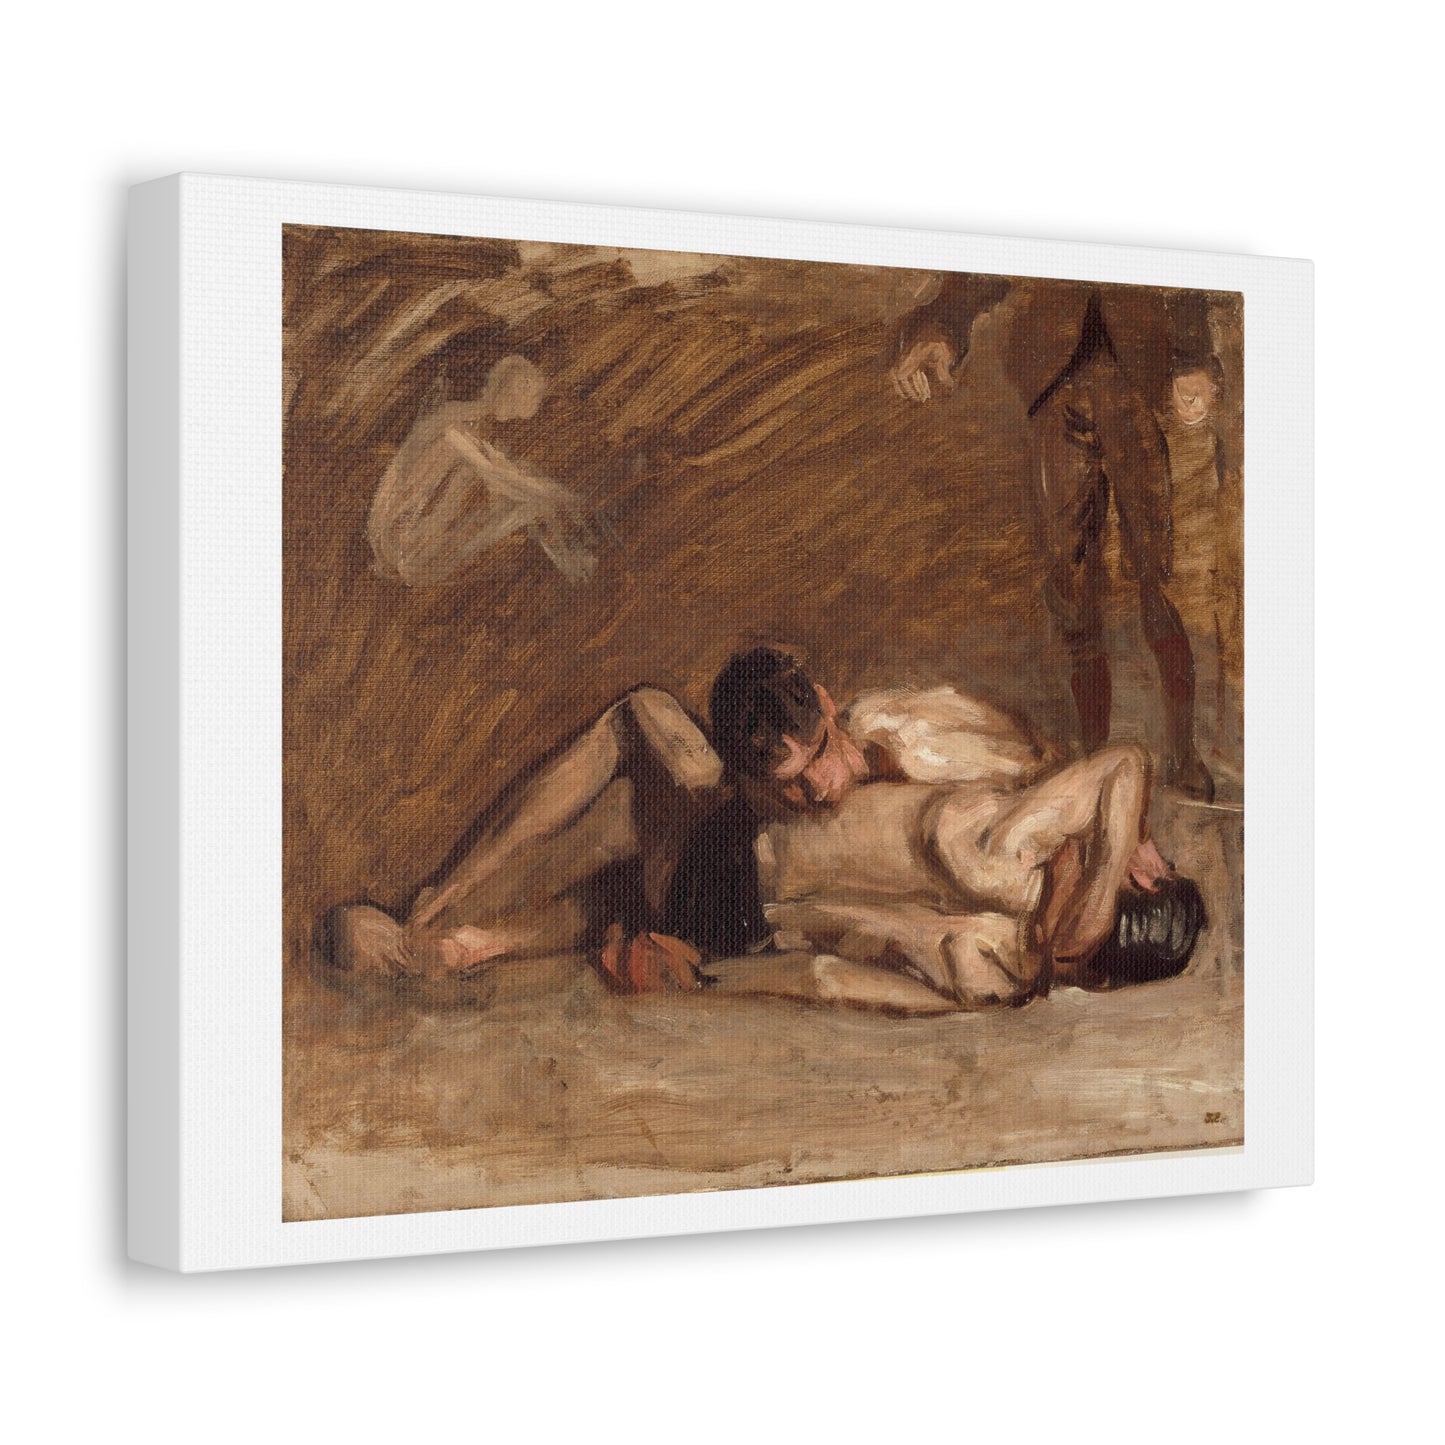 Wrestlers (1899) by Thomas Eakins, from the Original, Art Print on Canvas